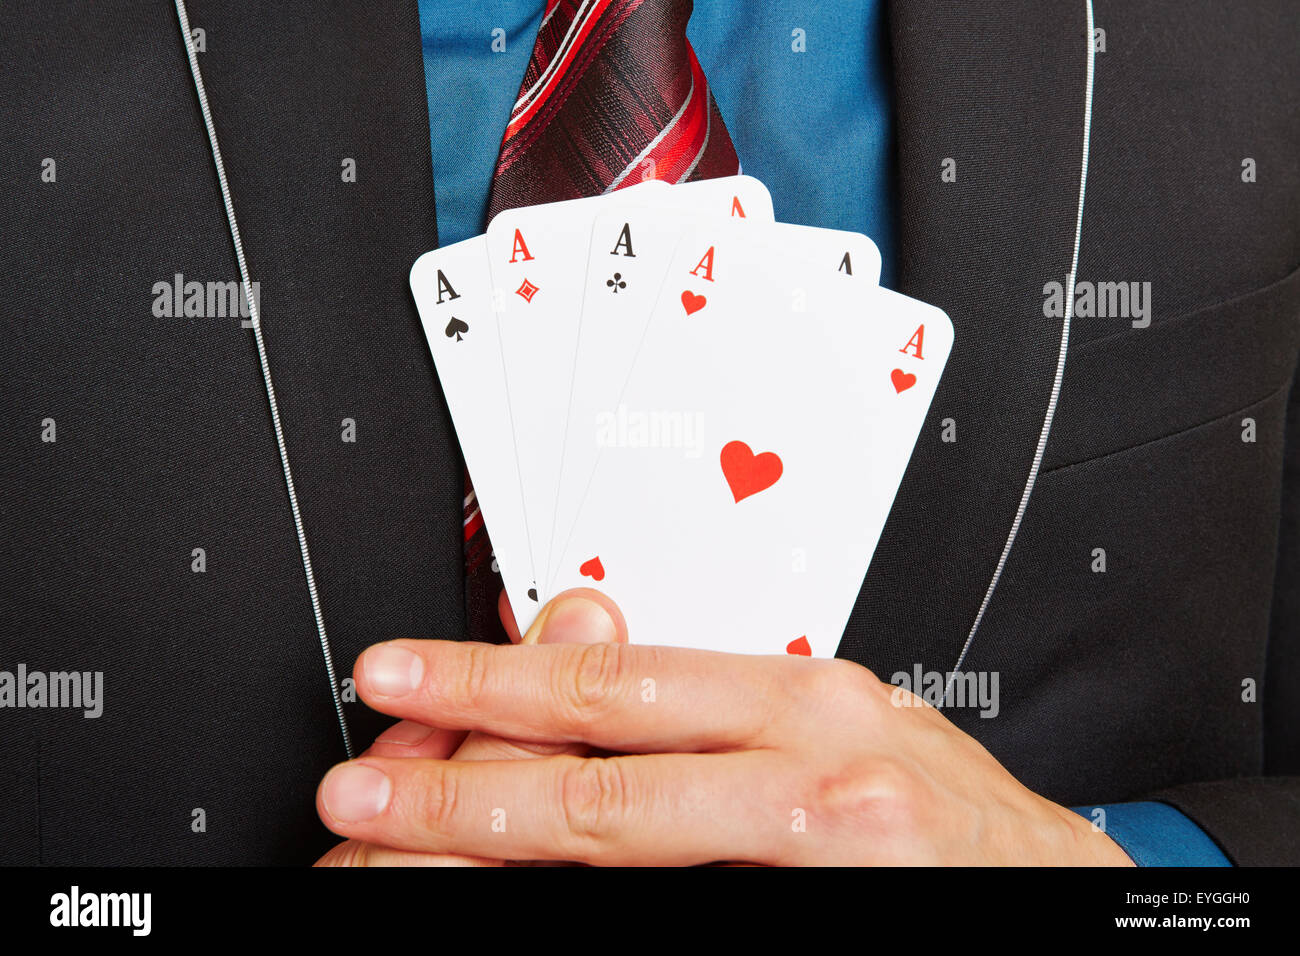 Business man holding four aces cards in his hands Stock Photo